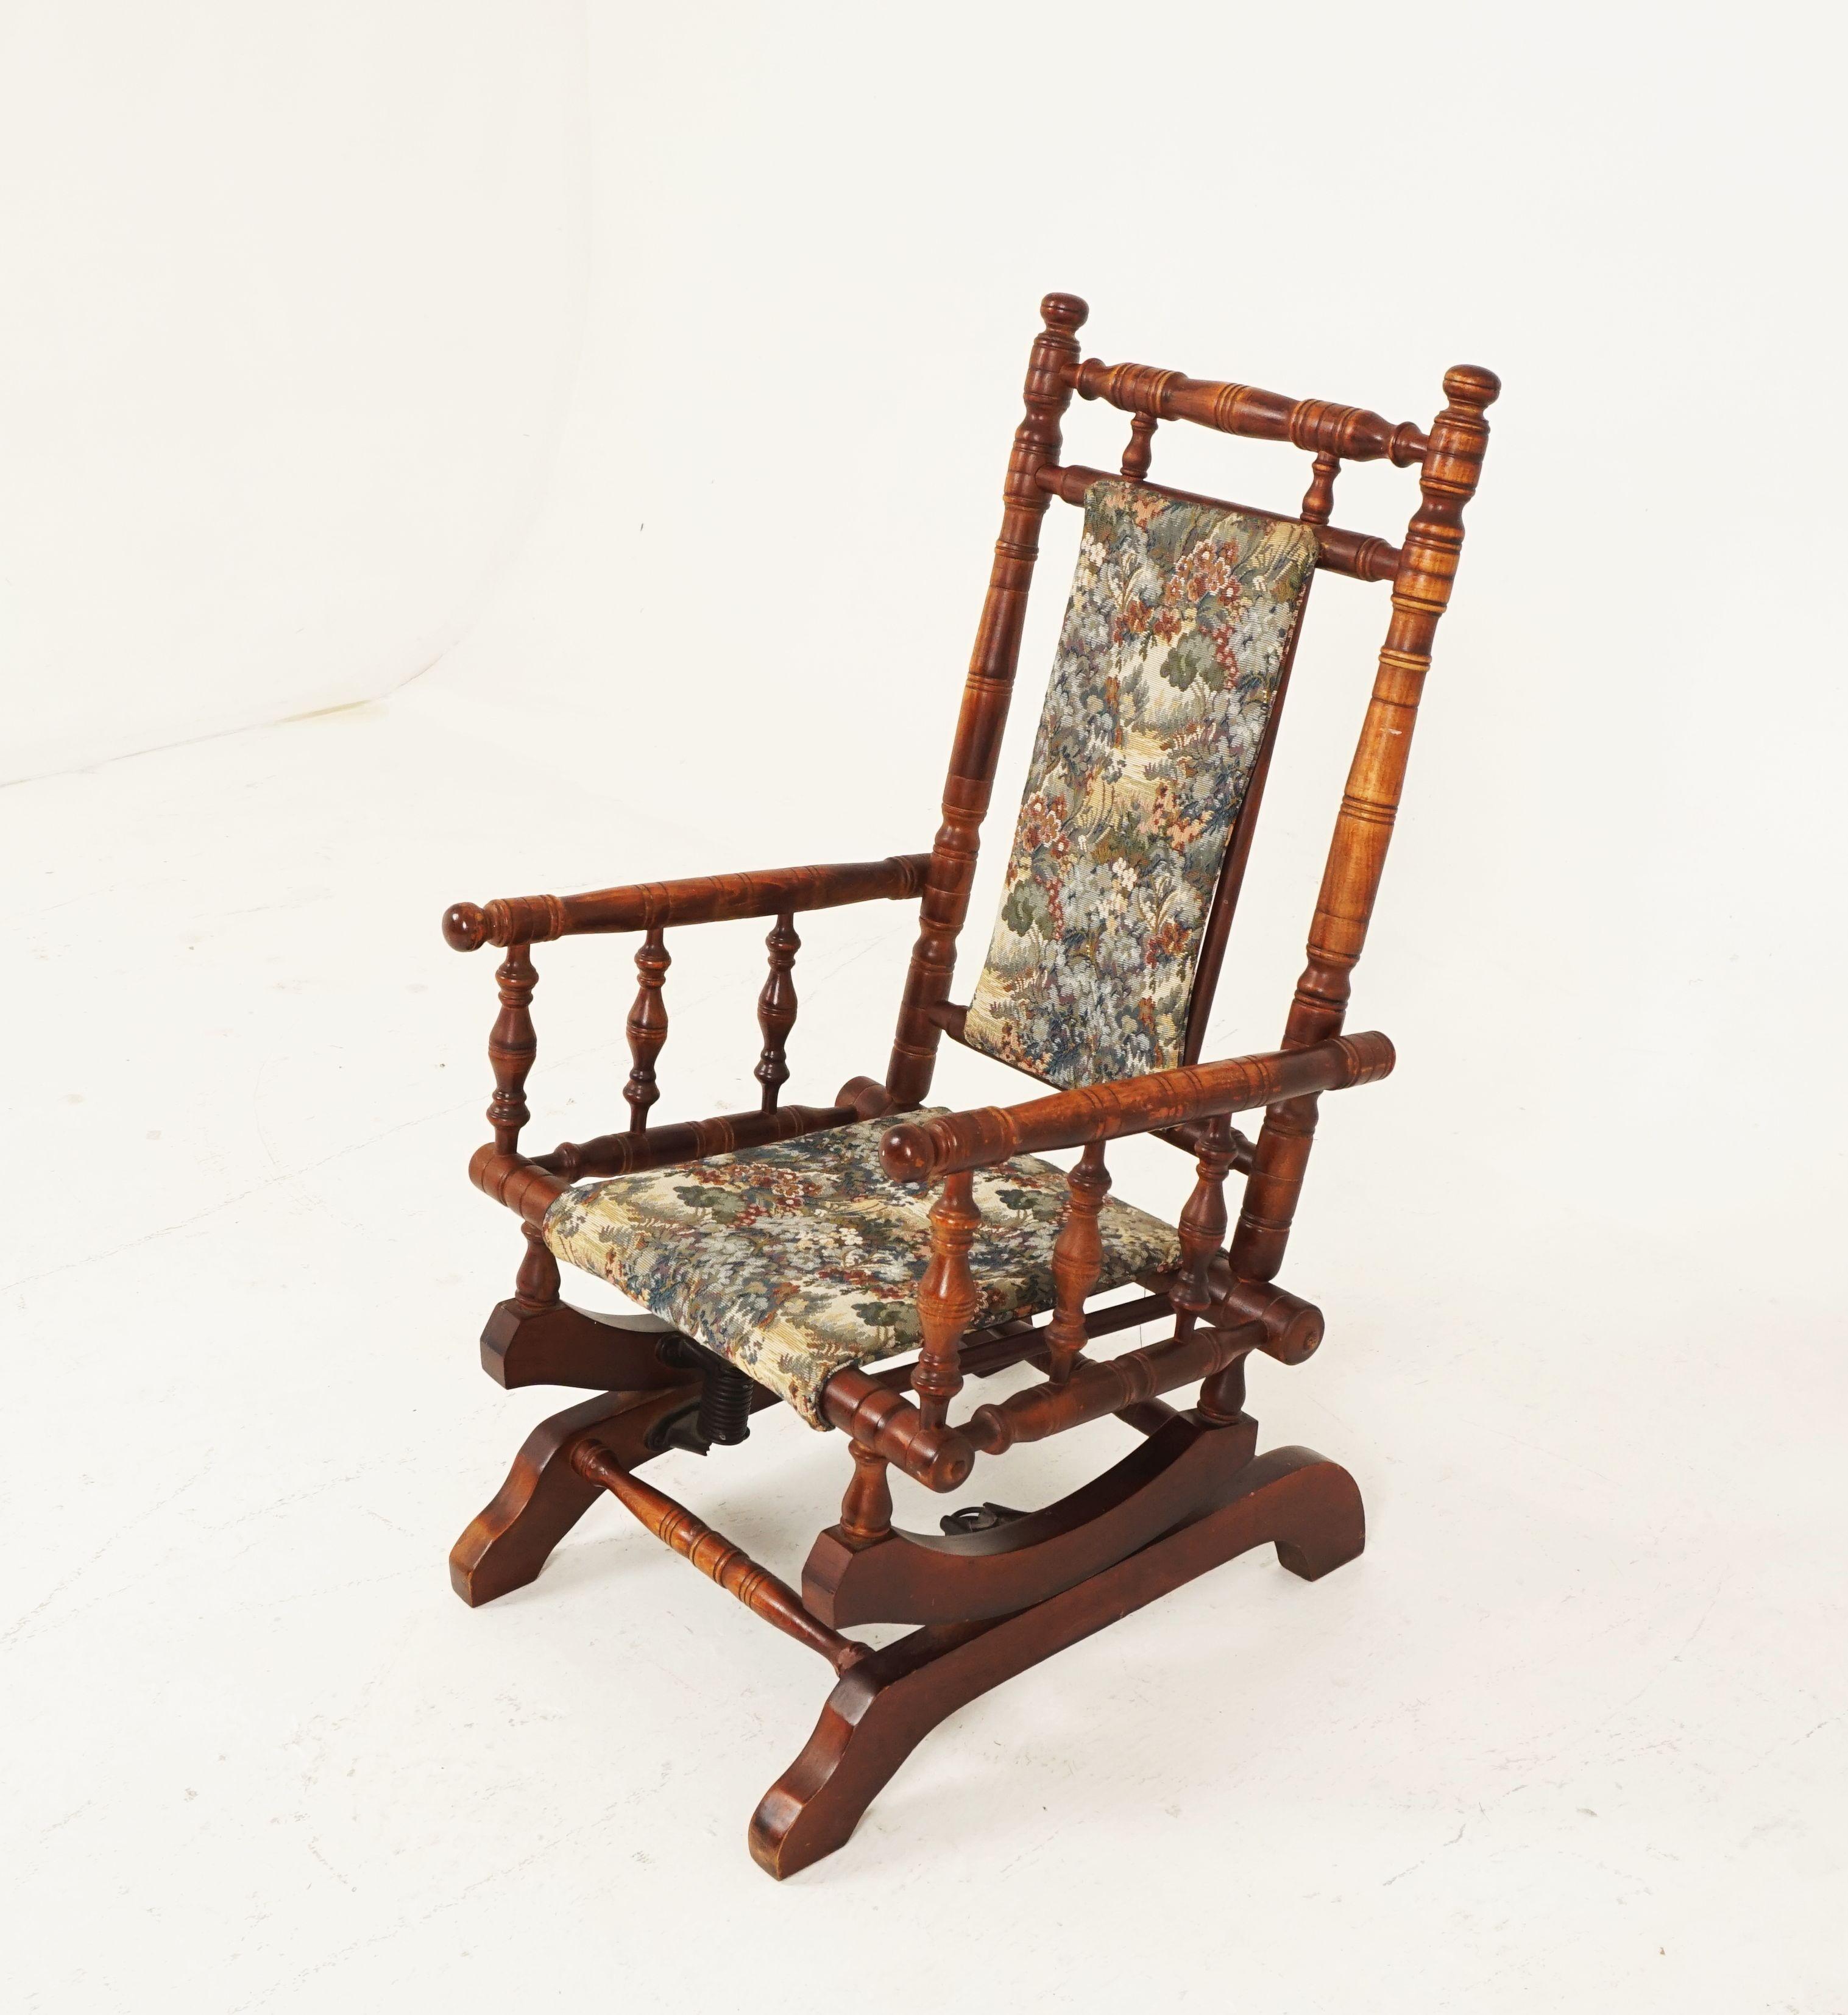 Vintage American beechwood child's platform rocking chair, Scotland 1970, H192

Scotland 1970
Solid beechwood 
Original finish
Padded back with new fabric
Double turned rails to the back
Upholstered seat
Sitting on a static platform base
The base